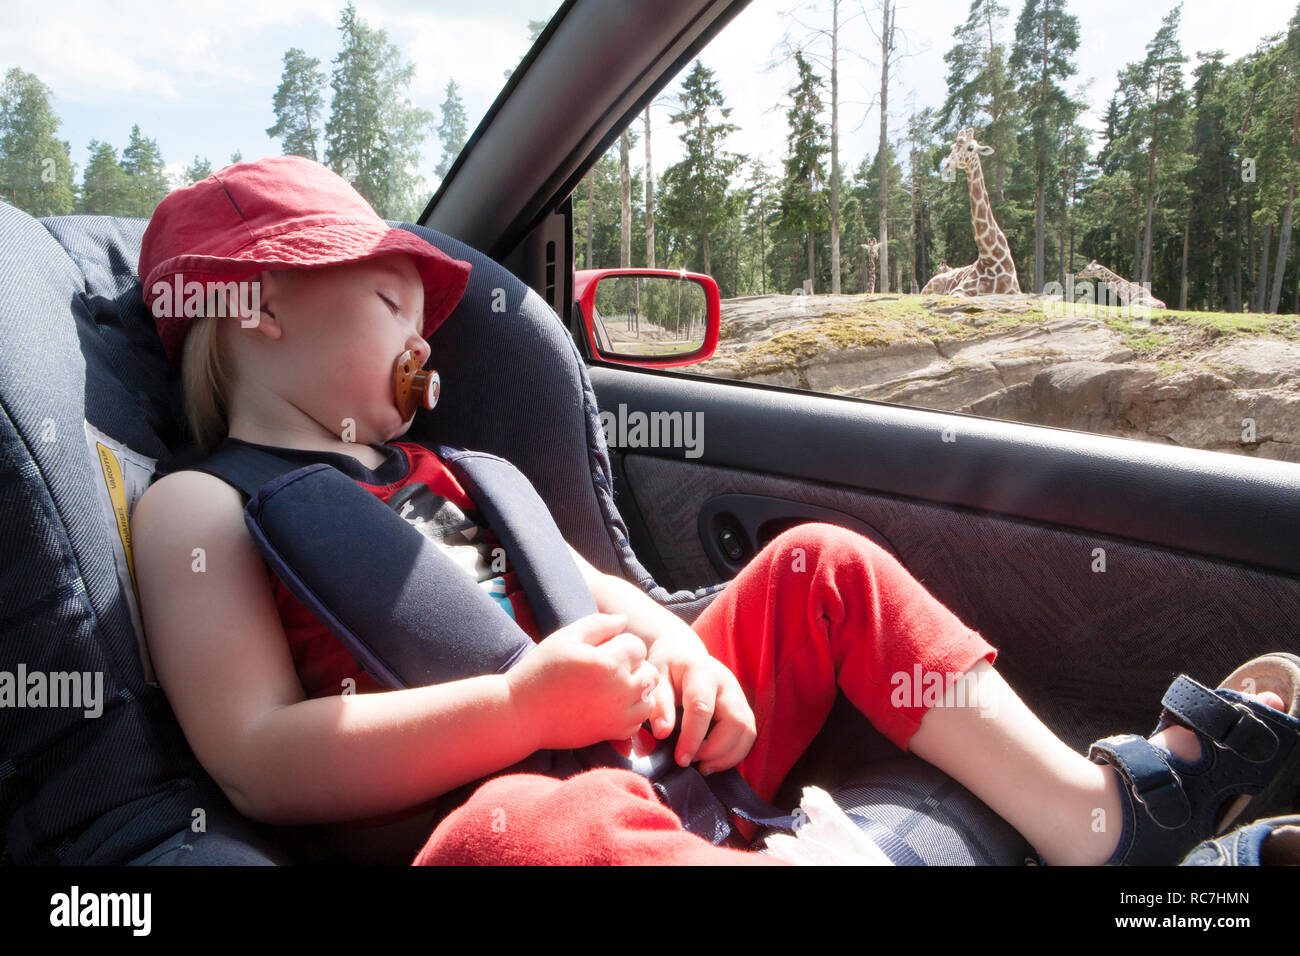 Girl sleeping in car while giraffes are visible in background Stock Photo